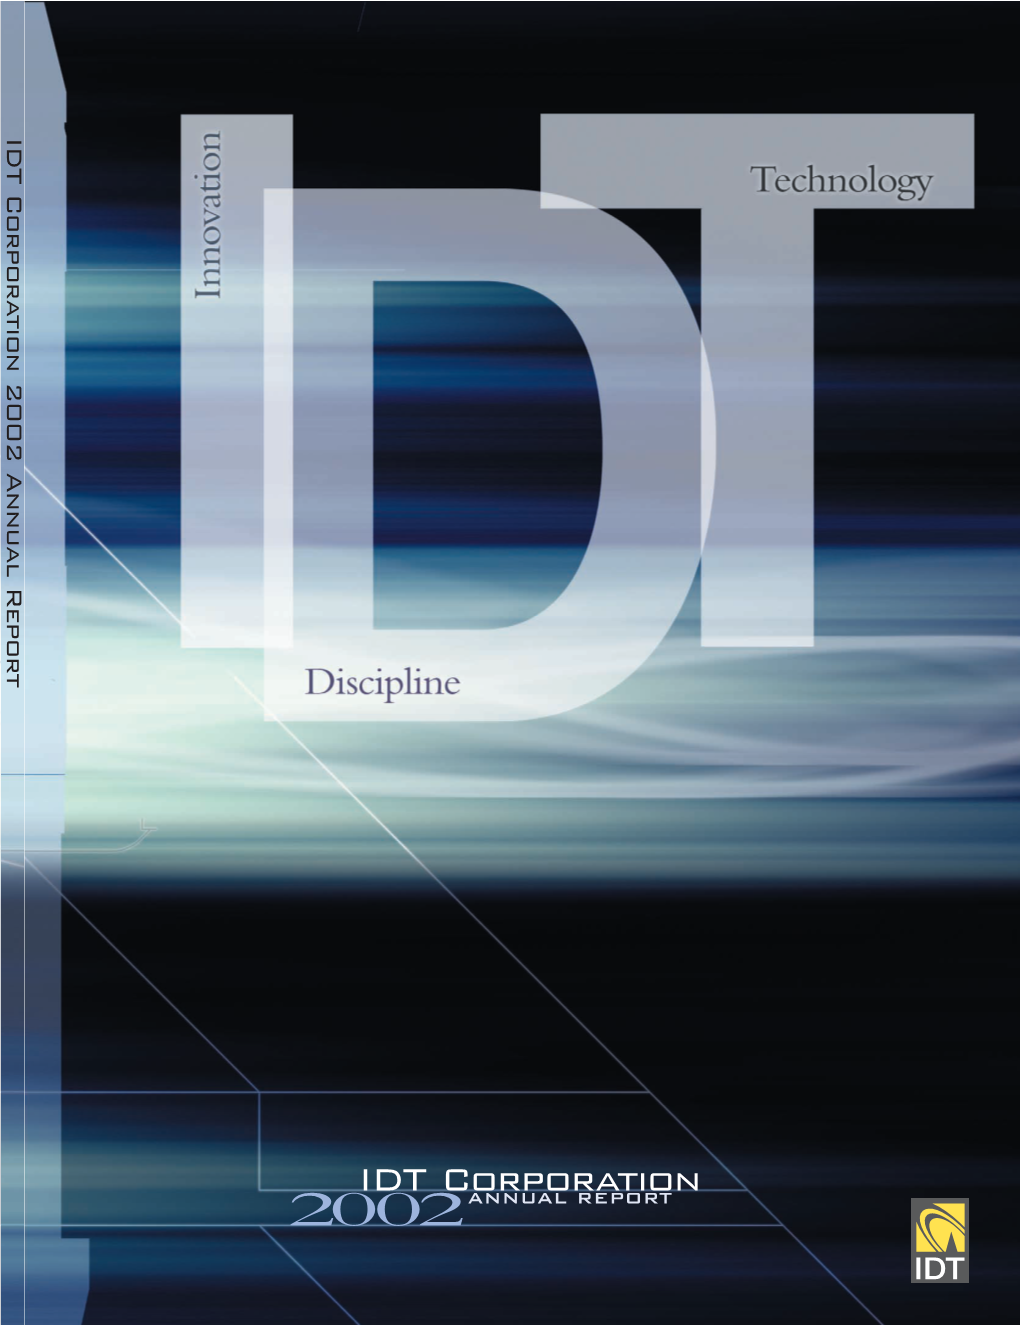 IDT Corpor a Tion 2002 Annual Report